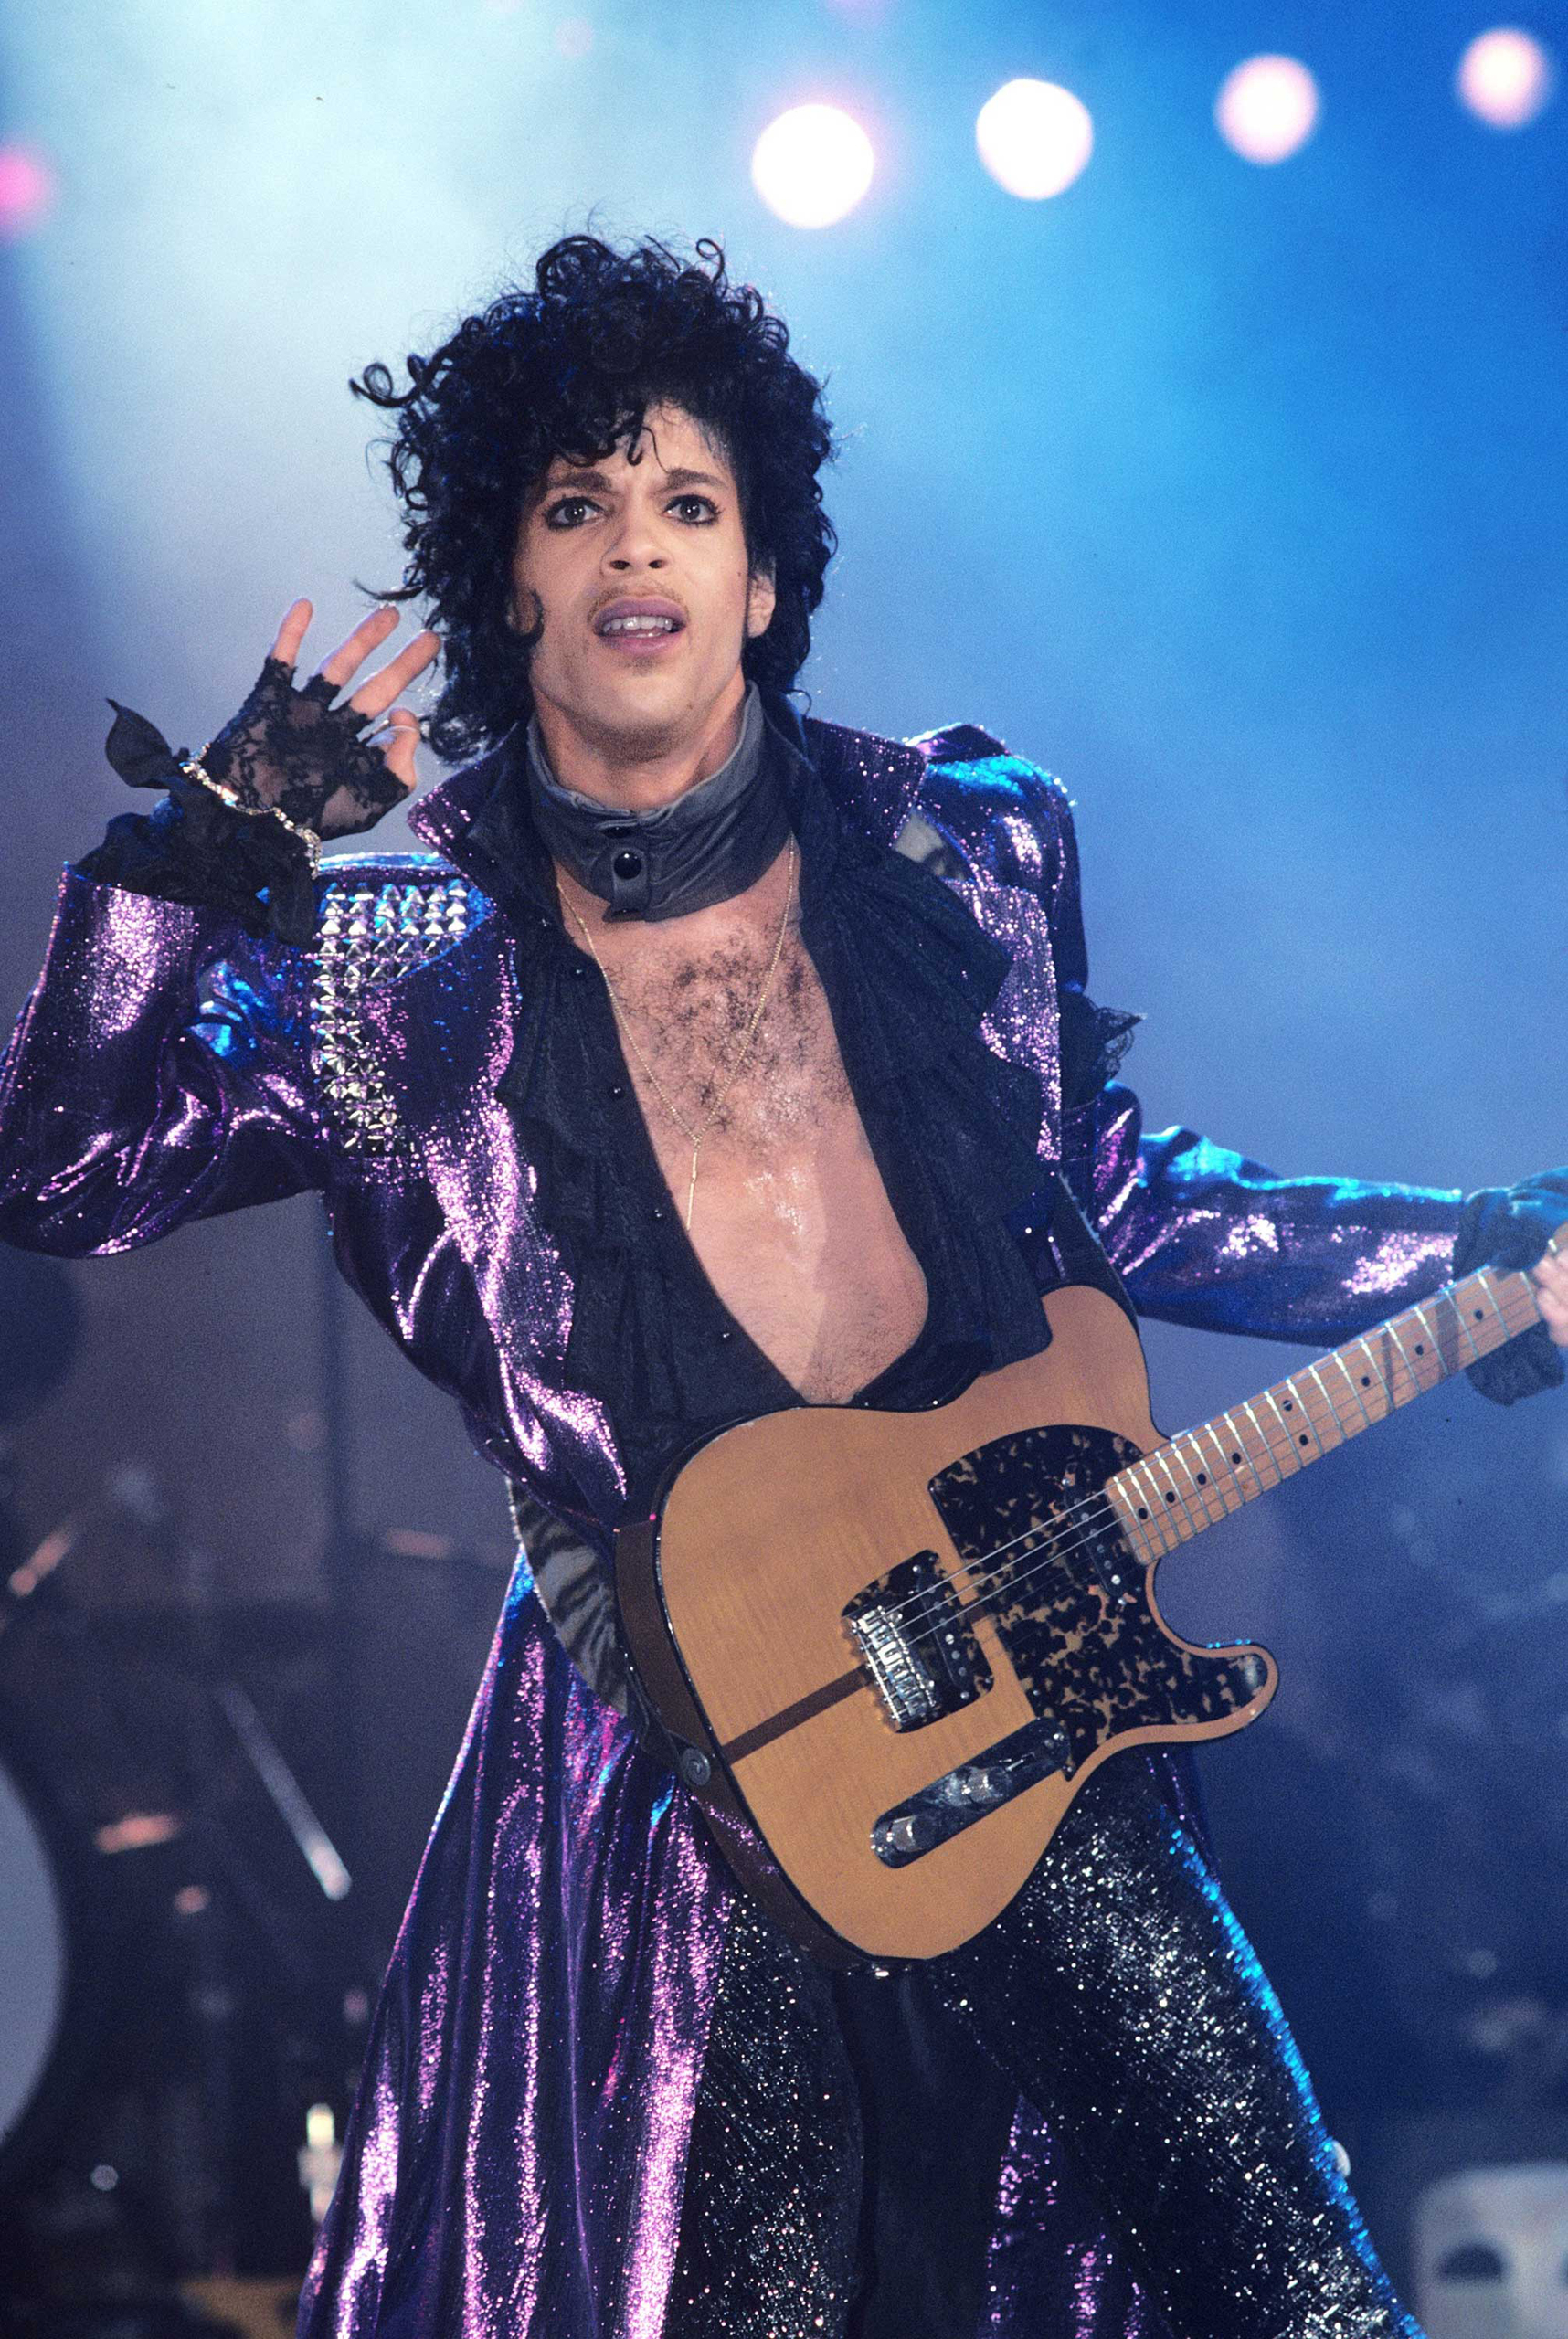 Prince’s home studio may house thousands of unreleased recordings